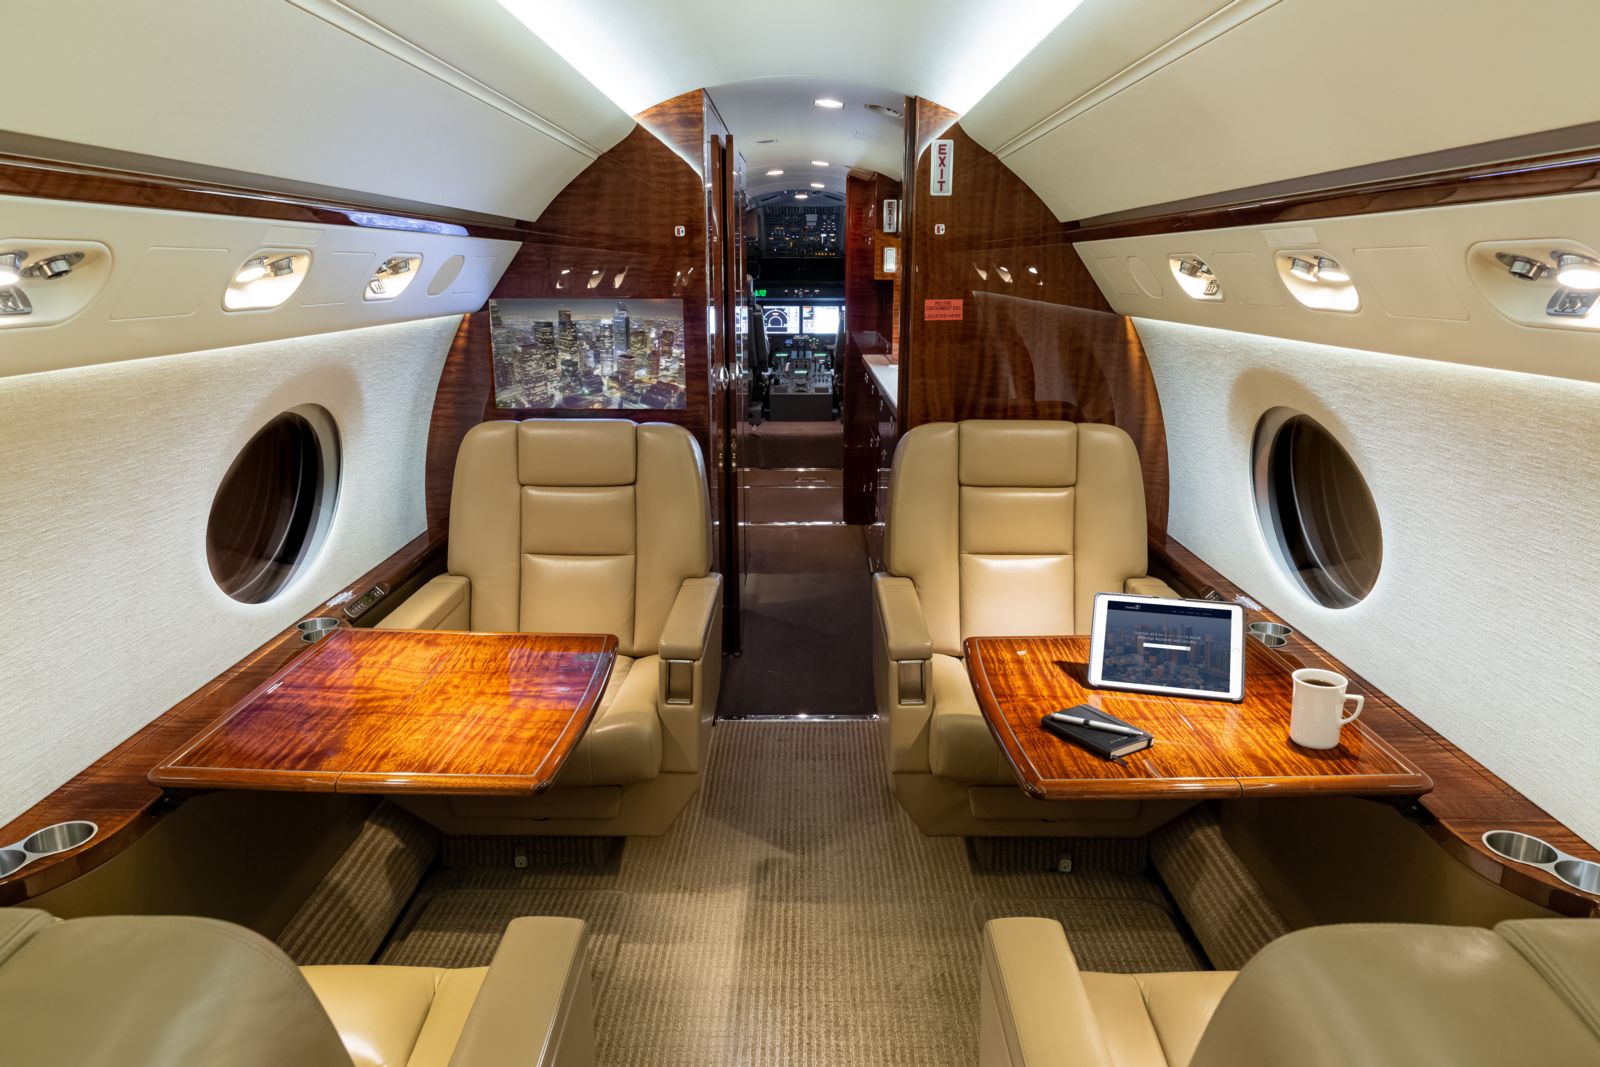 Gulfstream G550  S/N 5441 for sale | gallery image: /userfiles/images/G550_sn5441/bfp_1222.jpg